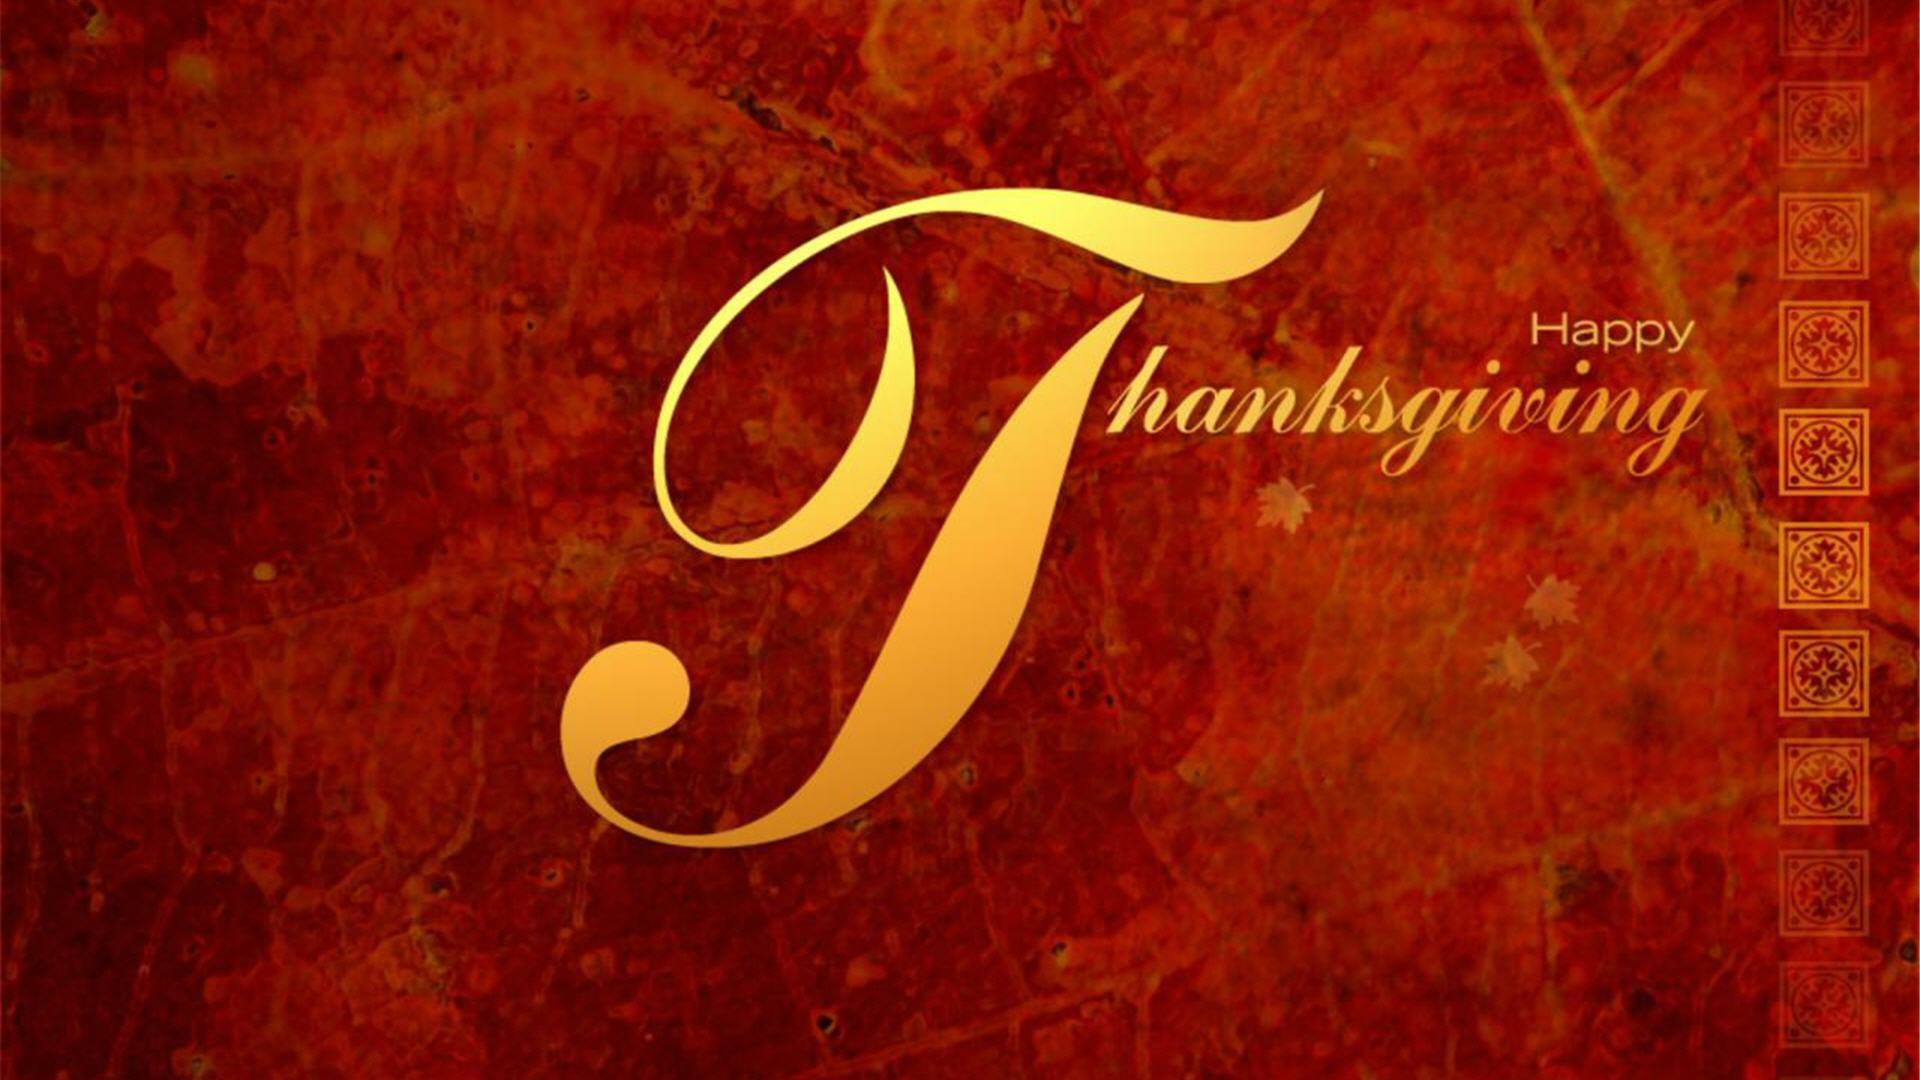 thanksgiving wallpaper,font,text,calligraphy,red,maroon